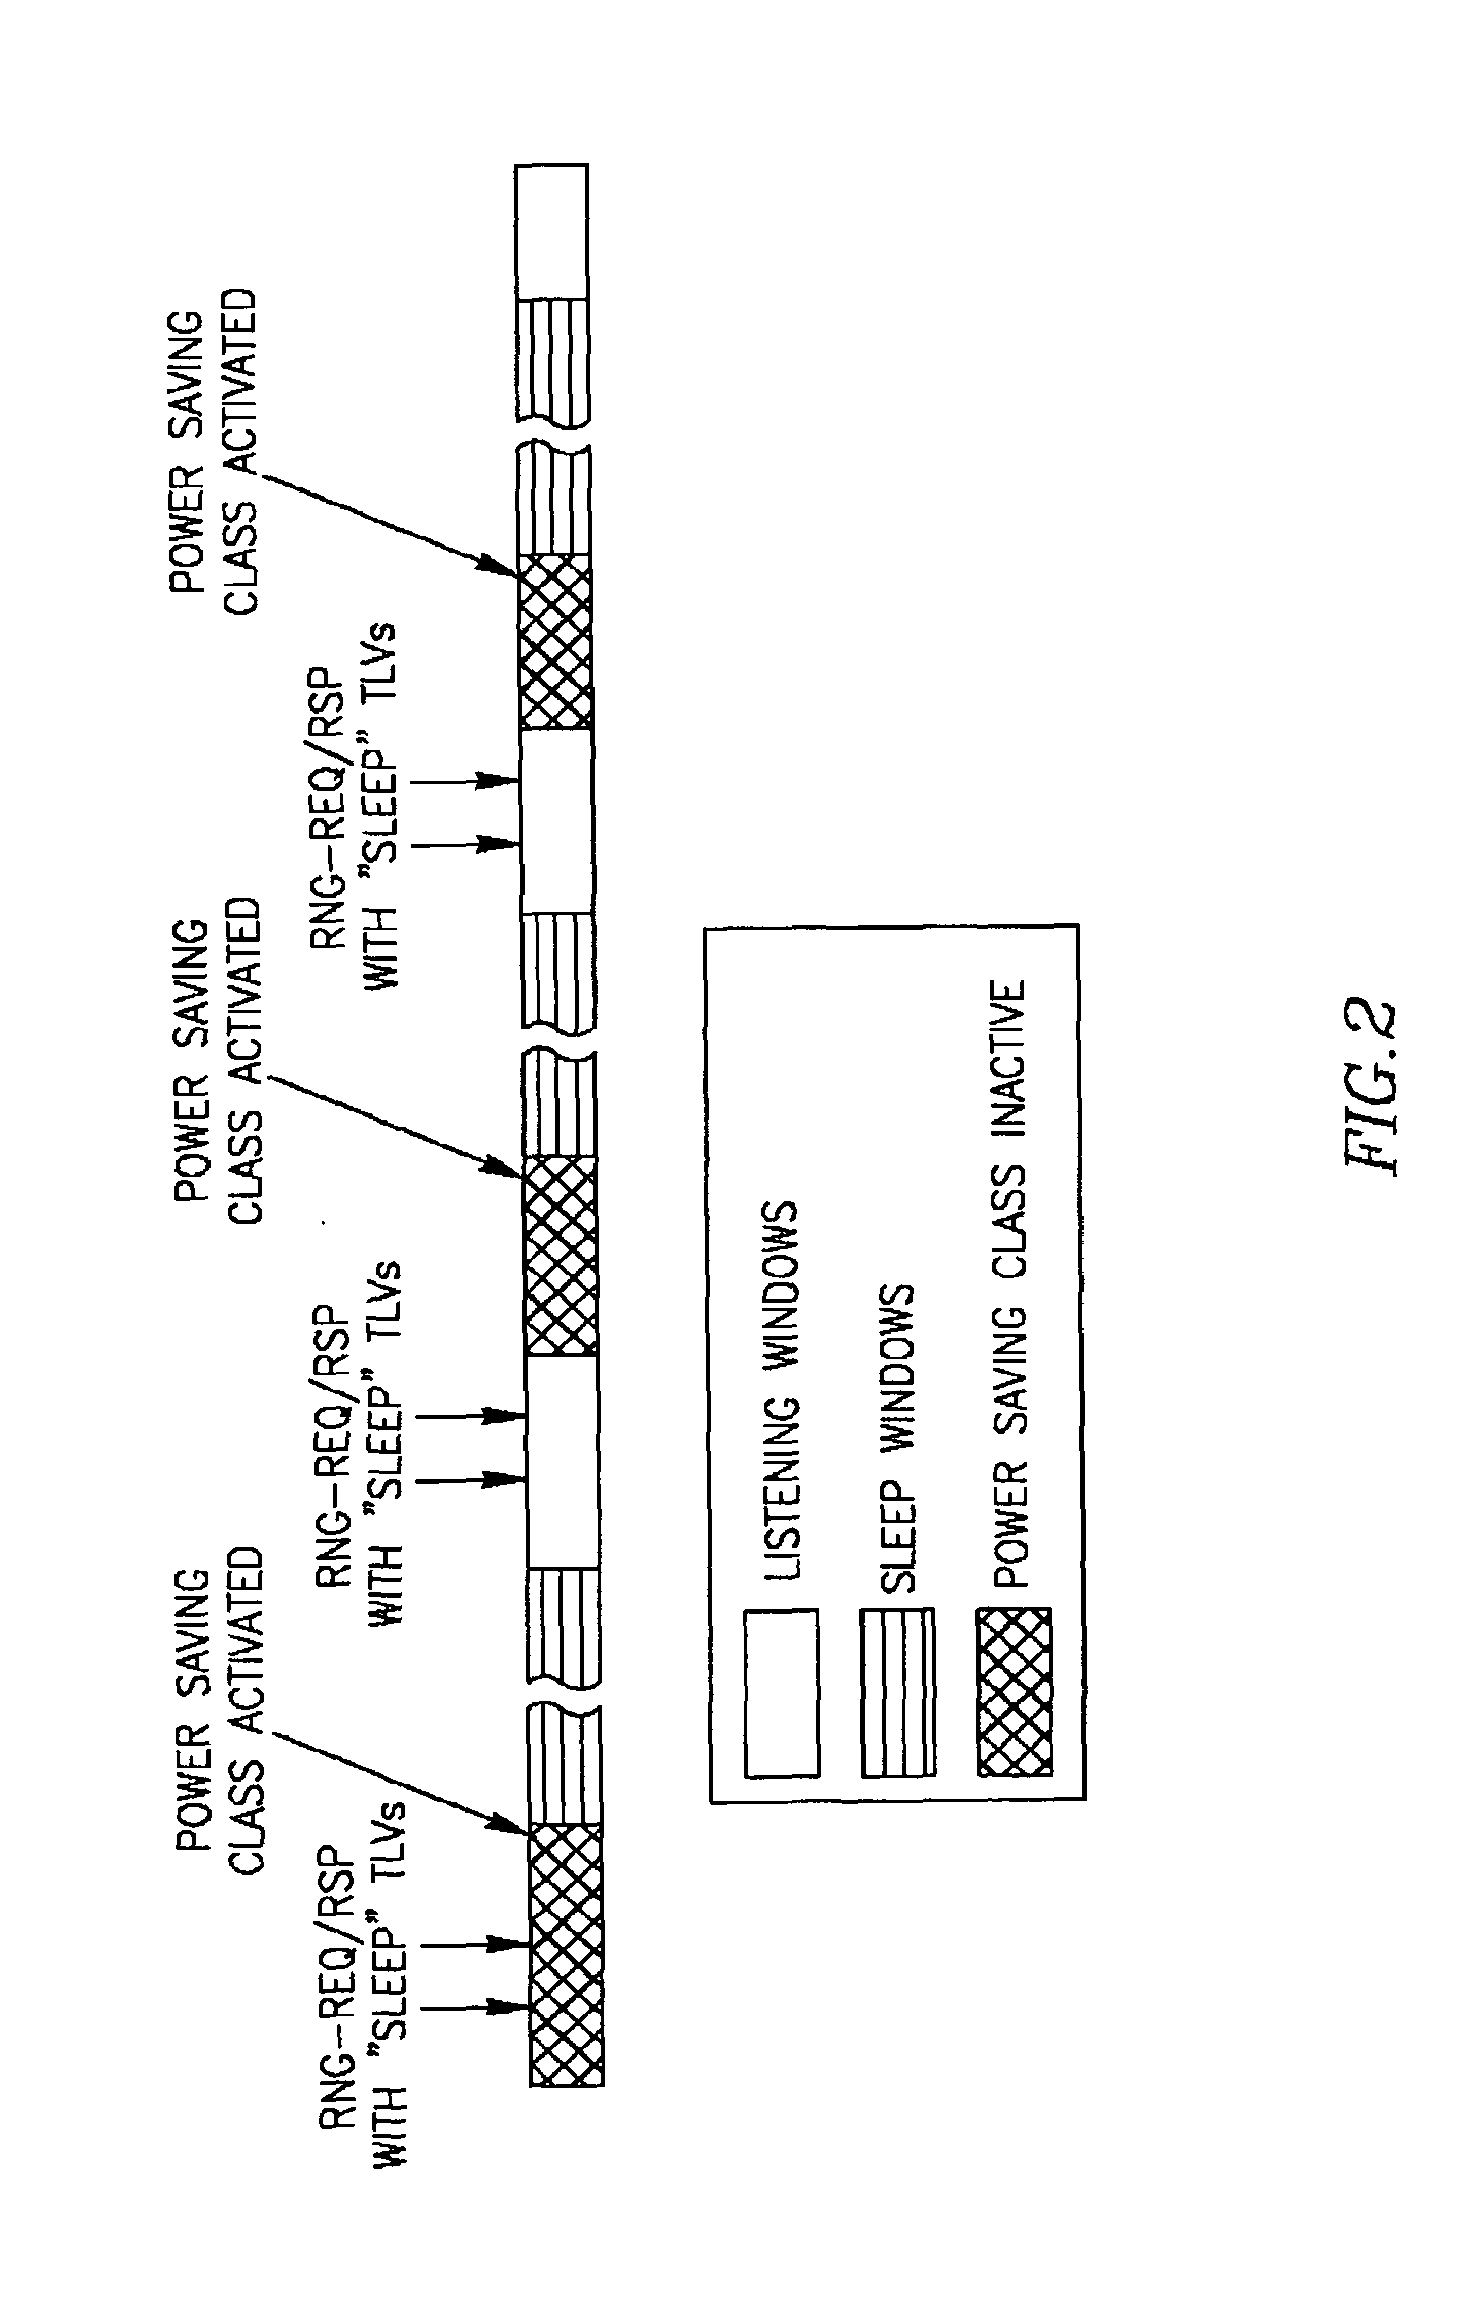 Method and apparatus for power saving in wireless systems